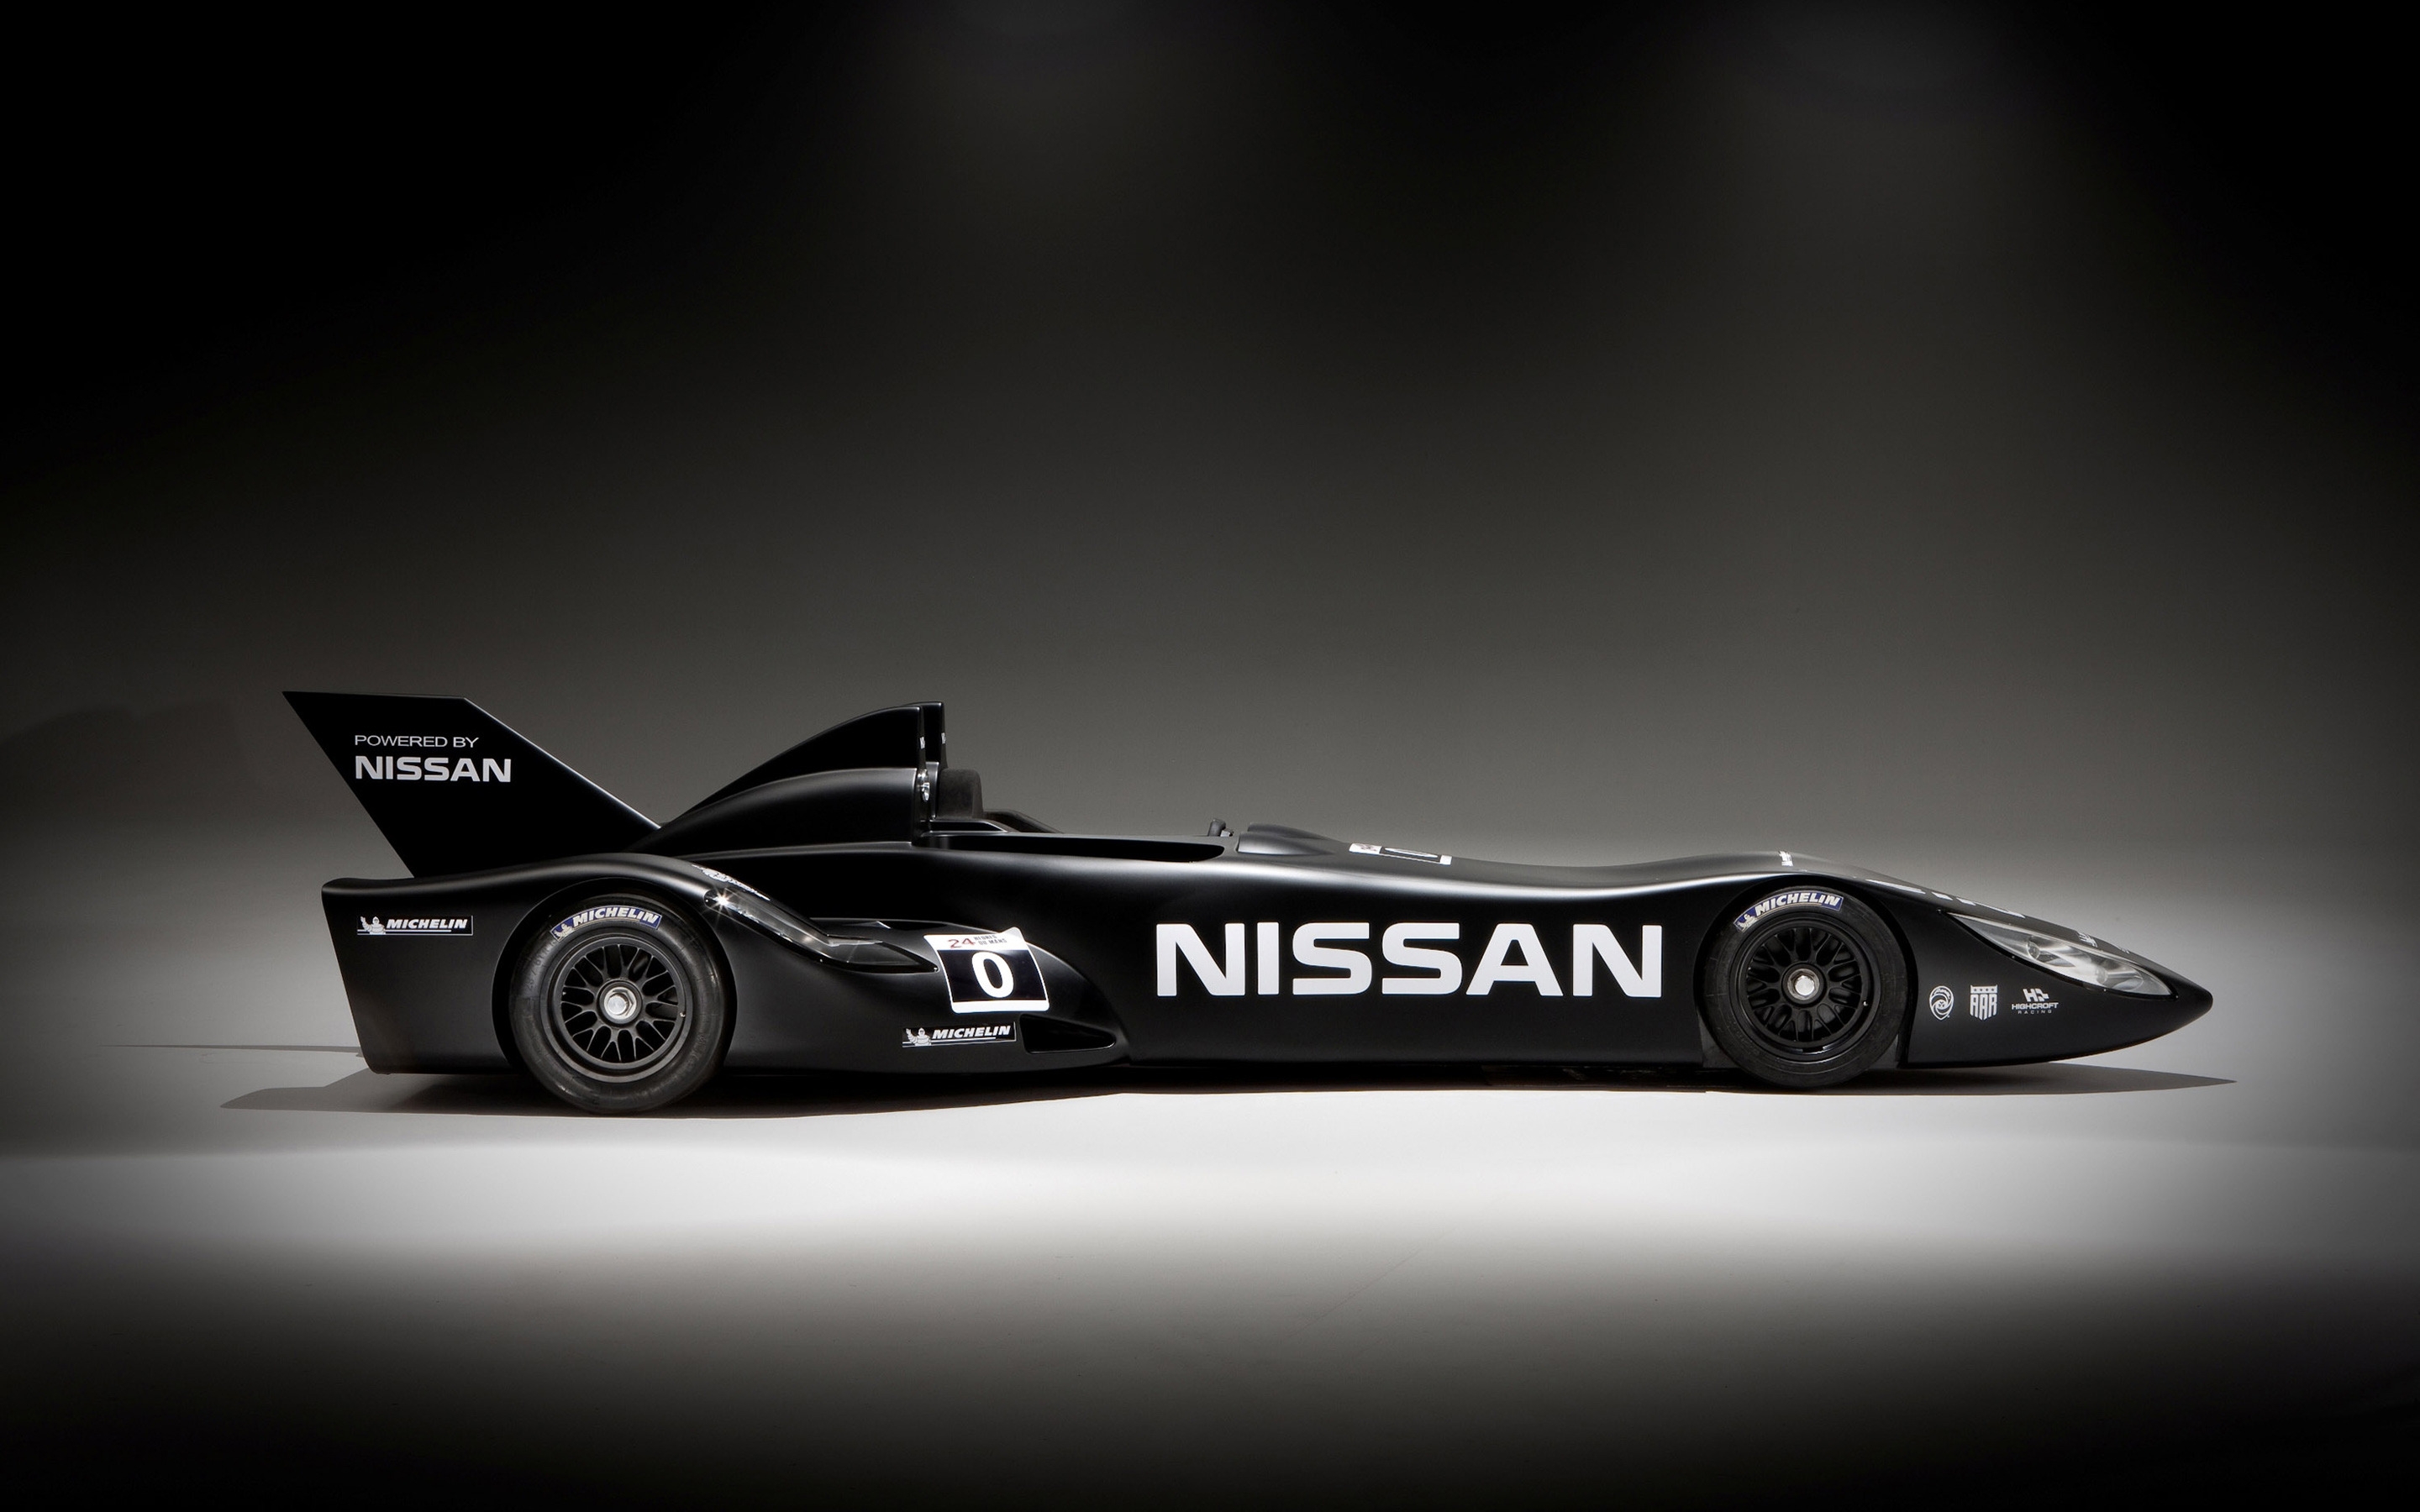 Nissan Deltawing for 2880 x 1800 Retina Display resolution